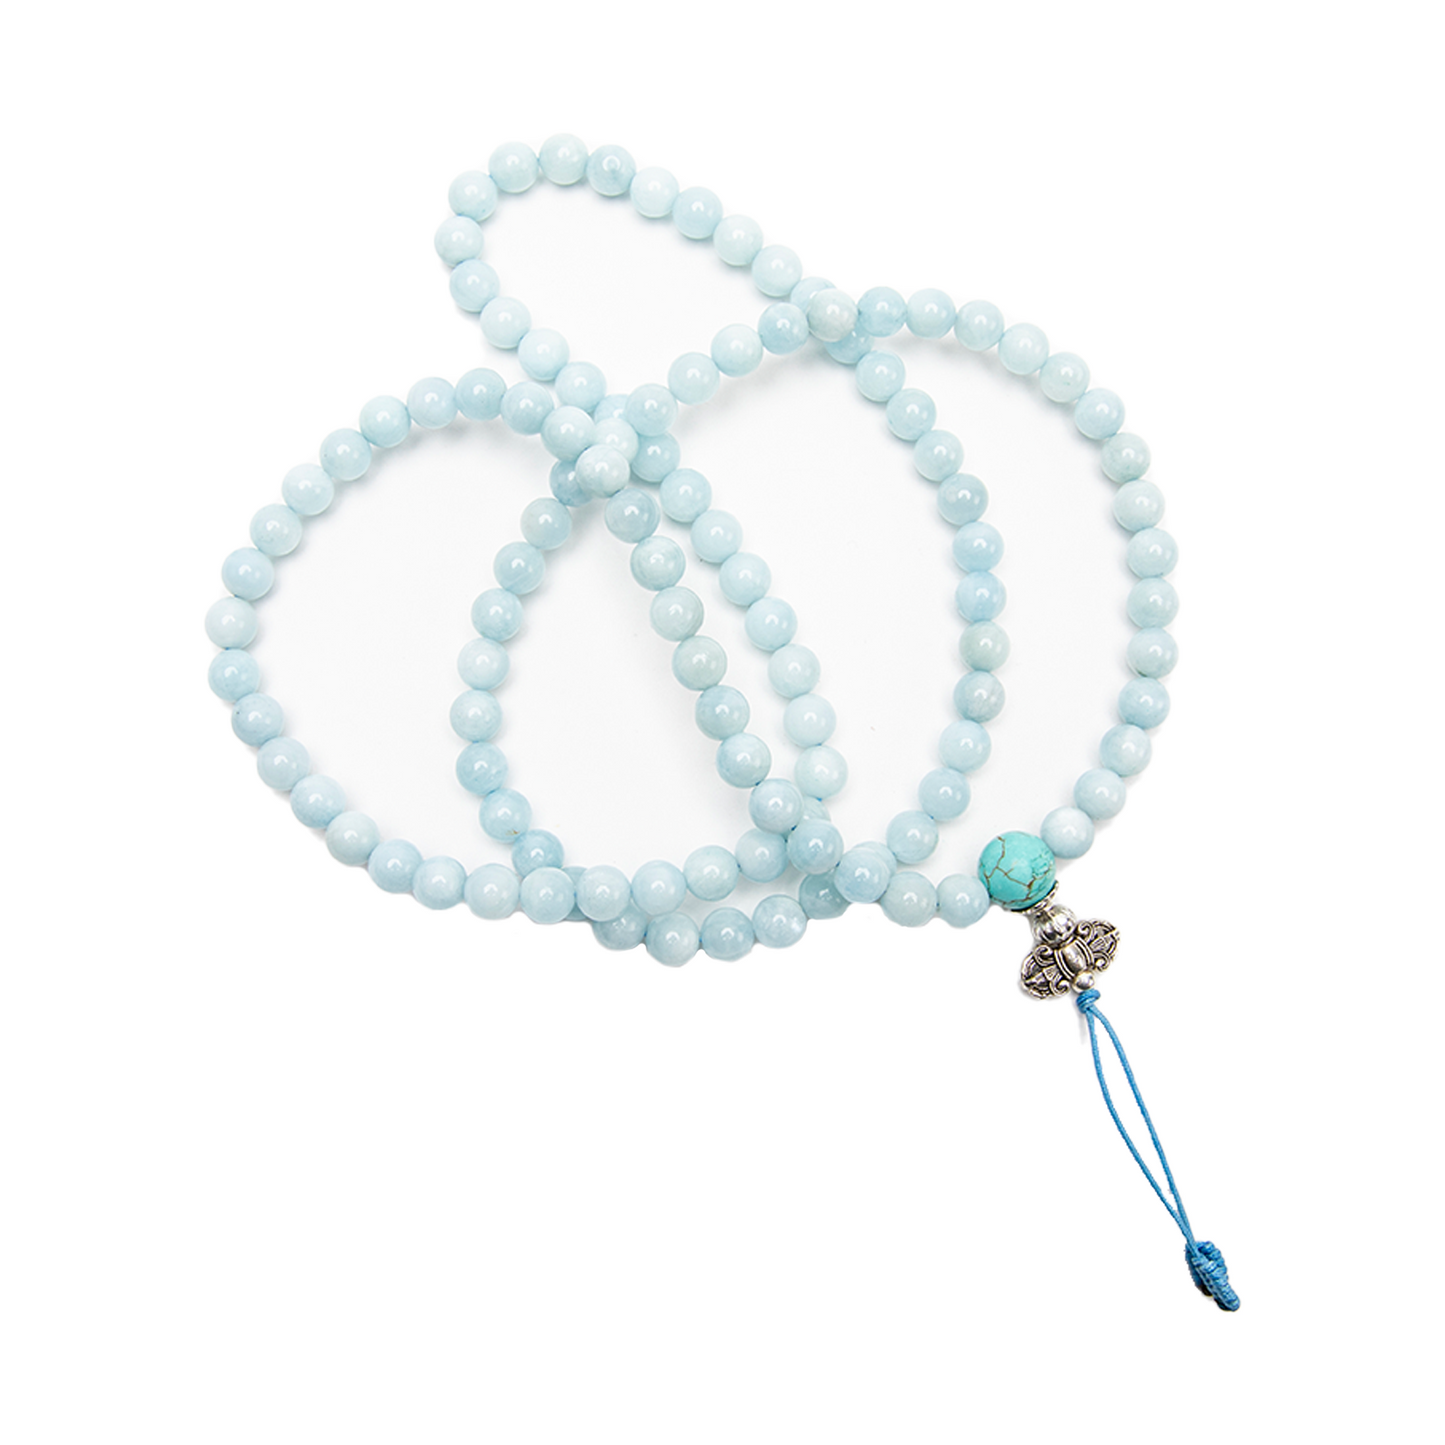 The Aquamarine Mala, 108 bead rests against a solid white backdrop, delicately coiled over itself.